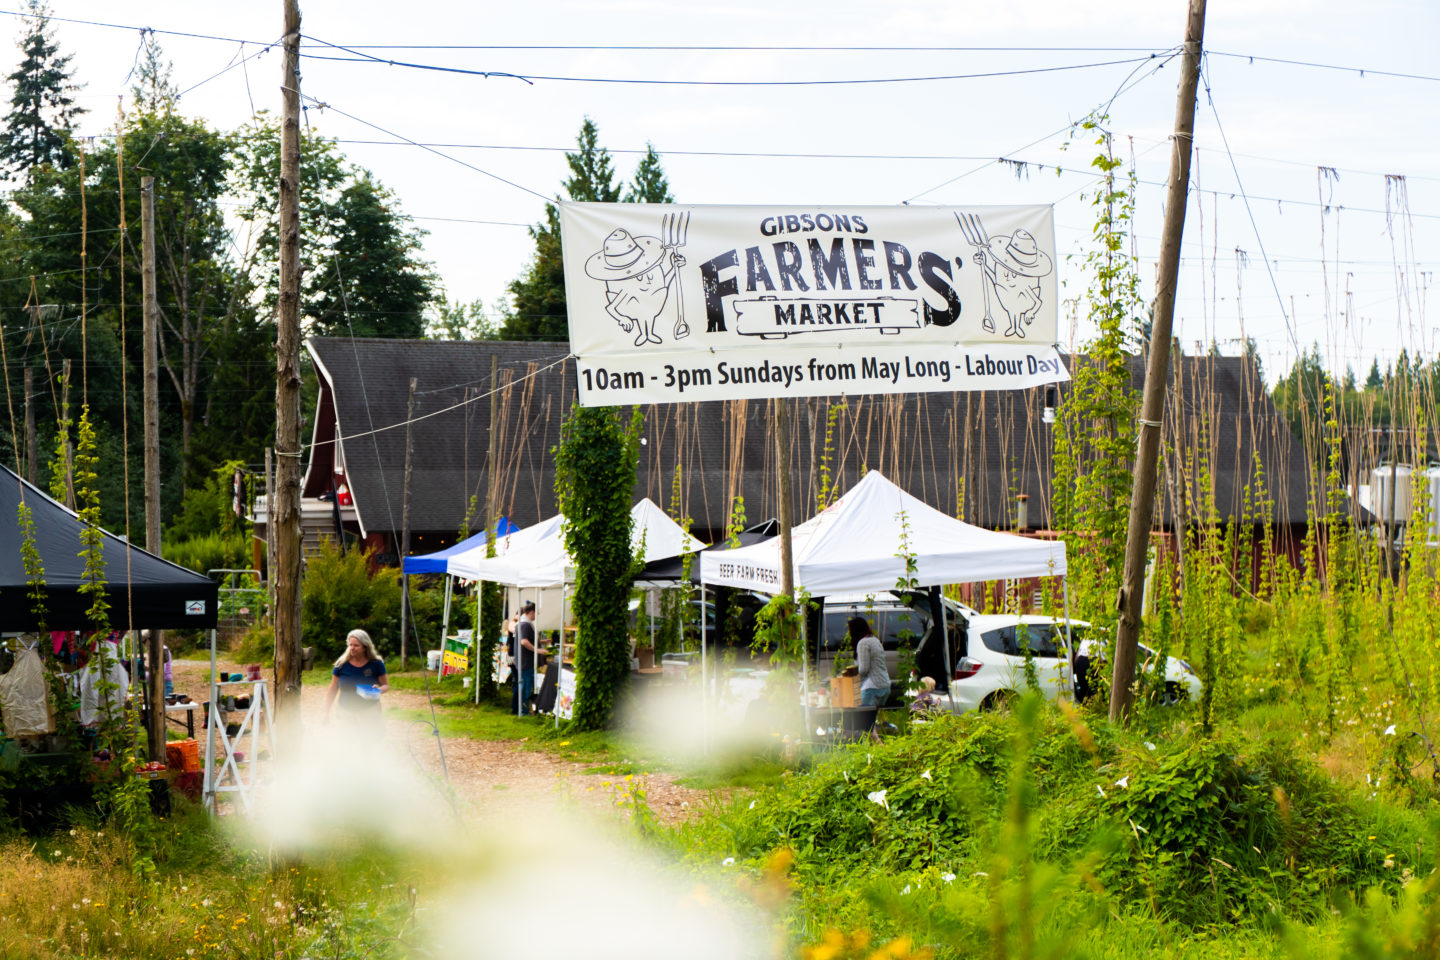 Farmers market at a farm with hops growing